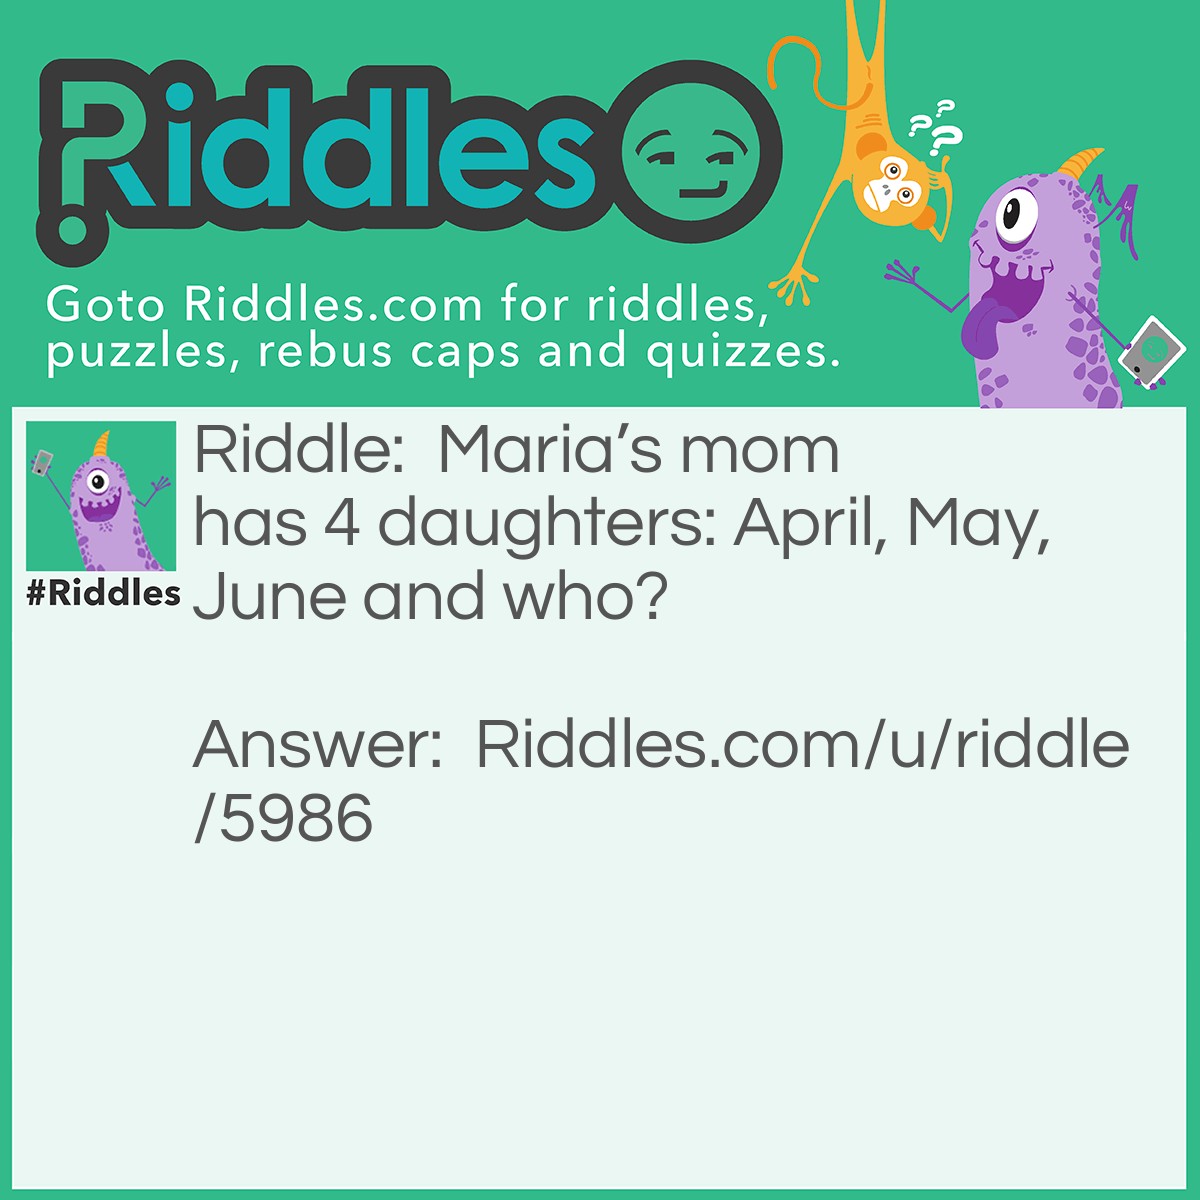 Riddle: Maria's mom has 4 daughters: April, May, June and who? Answer: Maria.